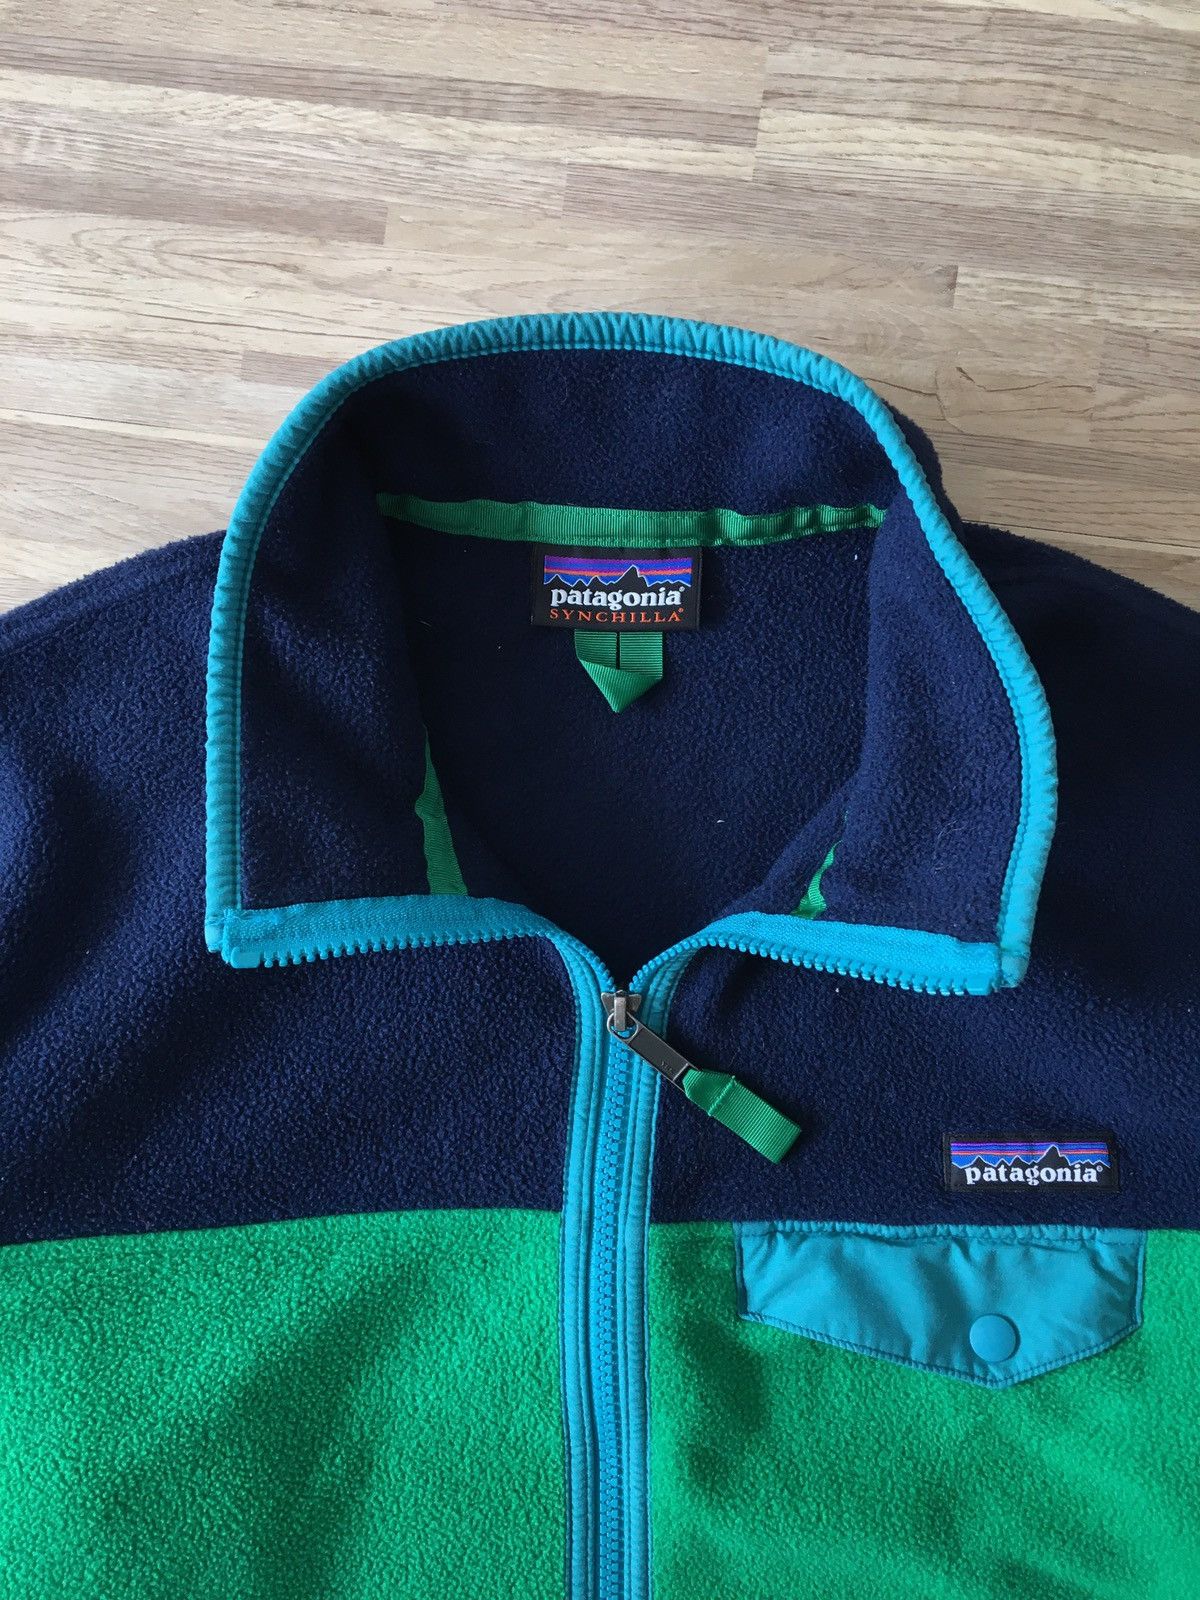 Vintage Patagonia 90’s Synchilla Snap-T Zip Fleece Pullover Size US M / EU 48-50 / 2 - 2 Preview